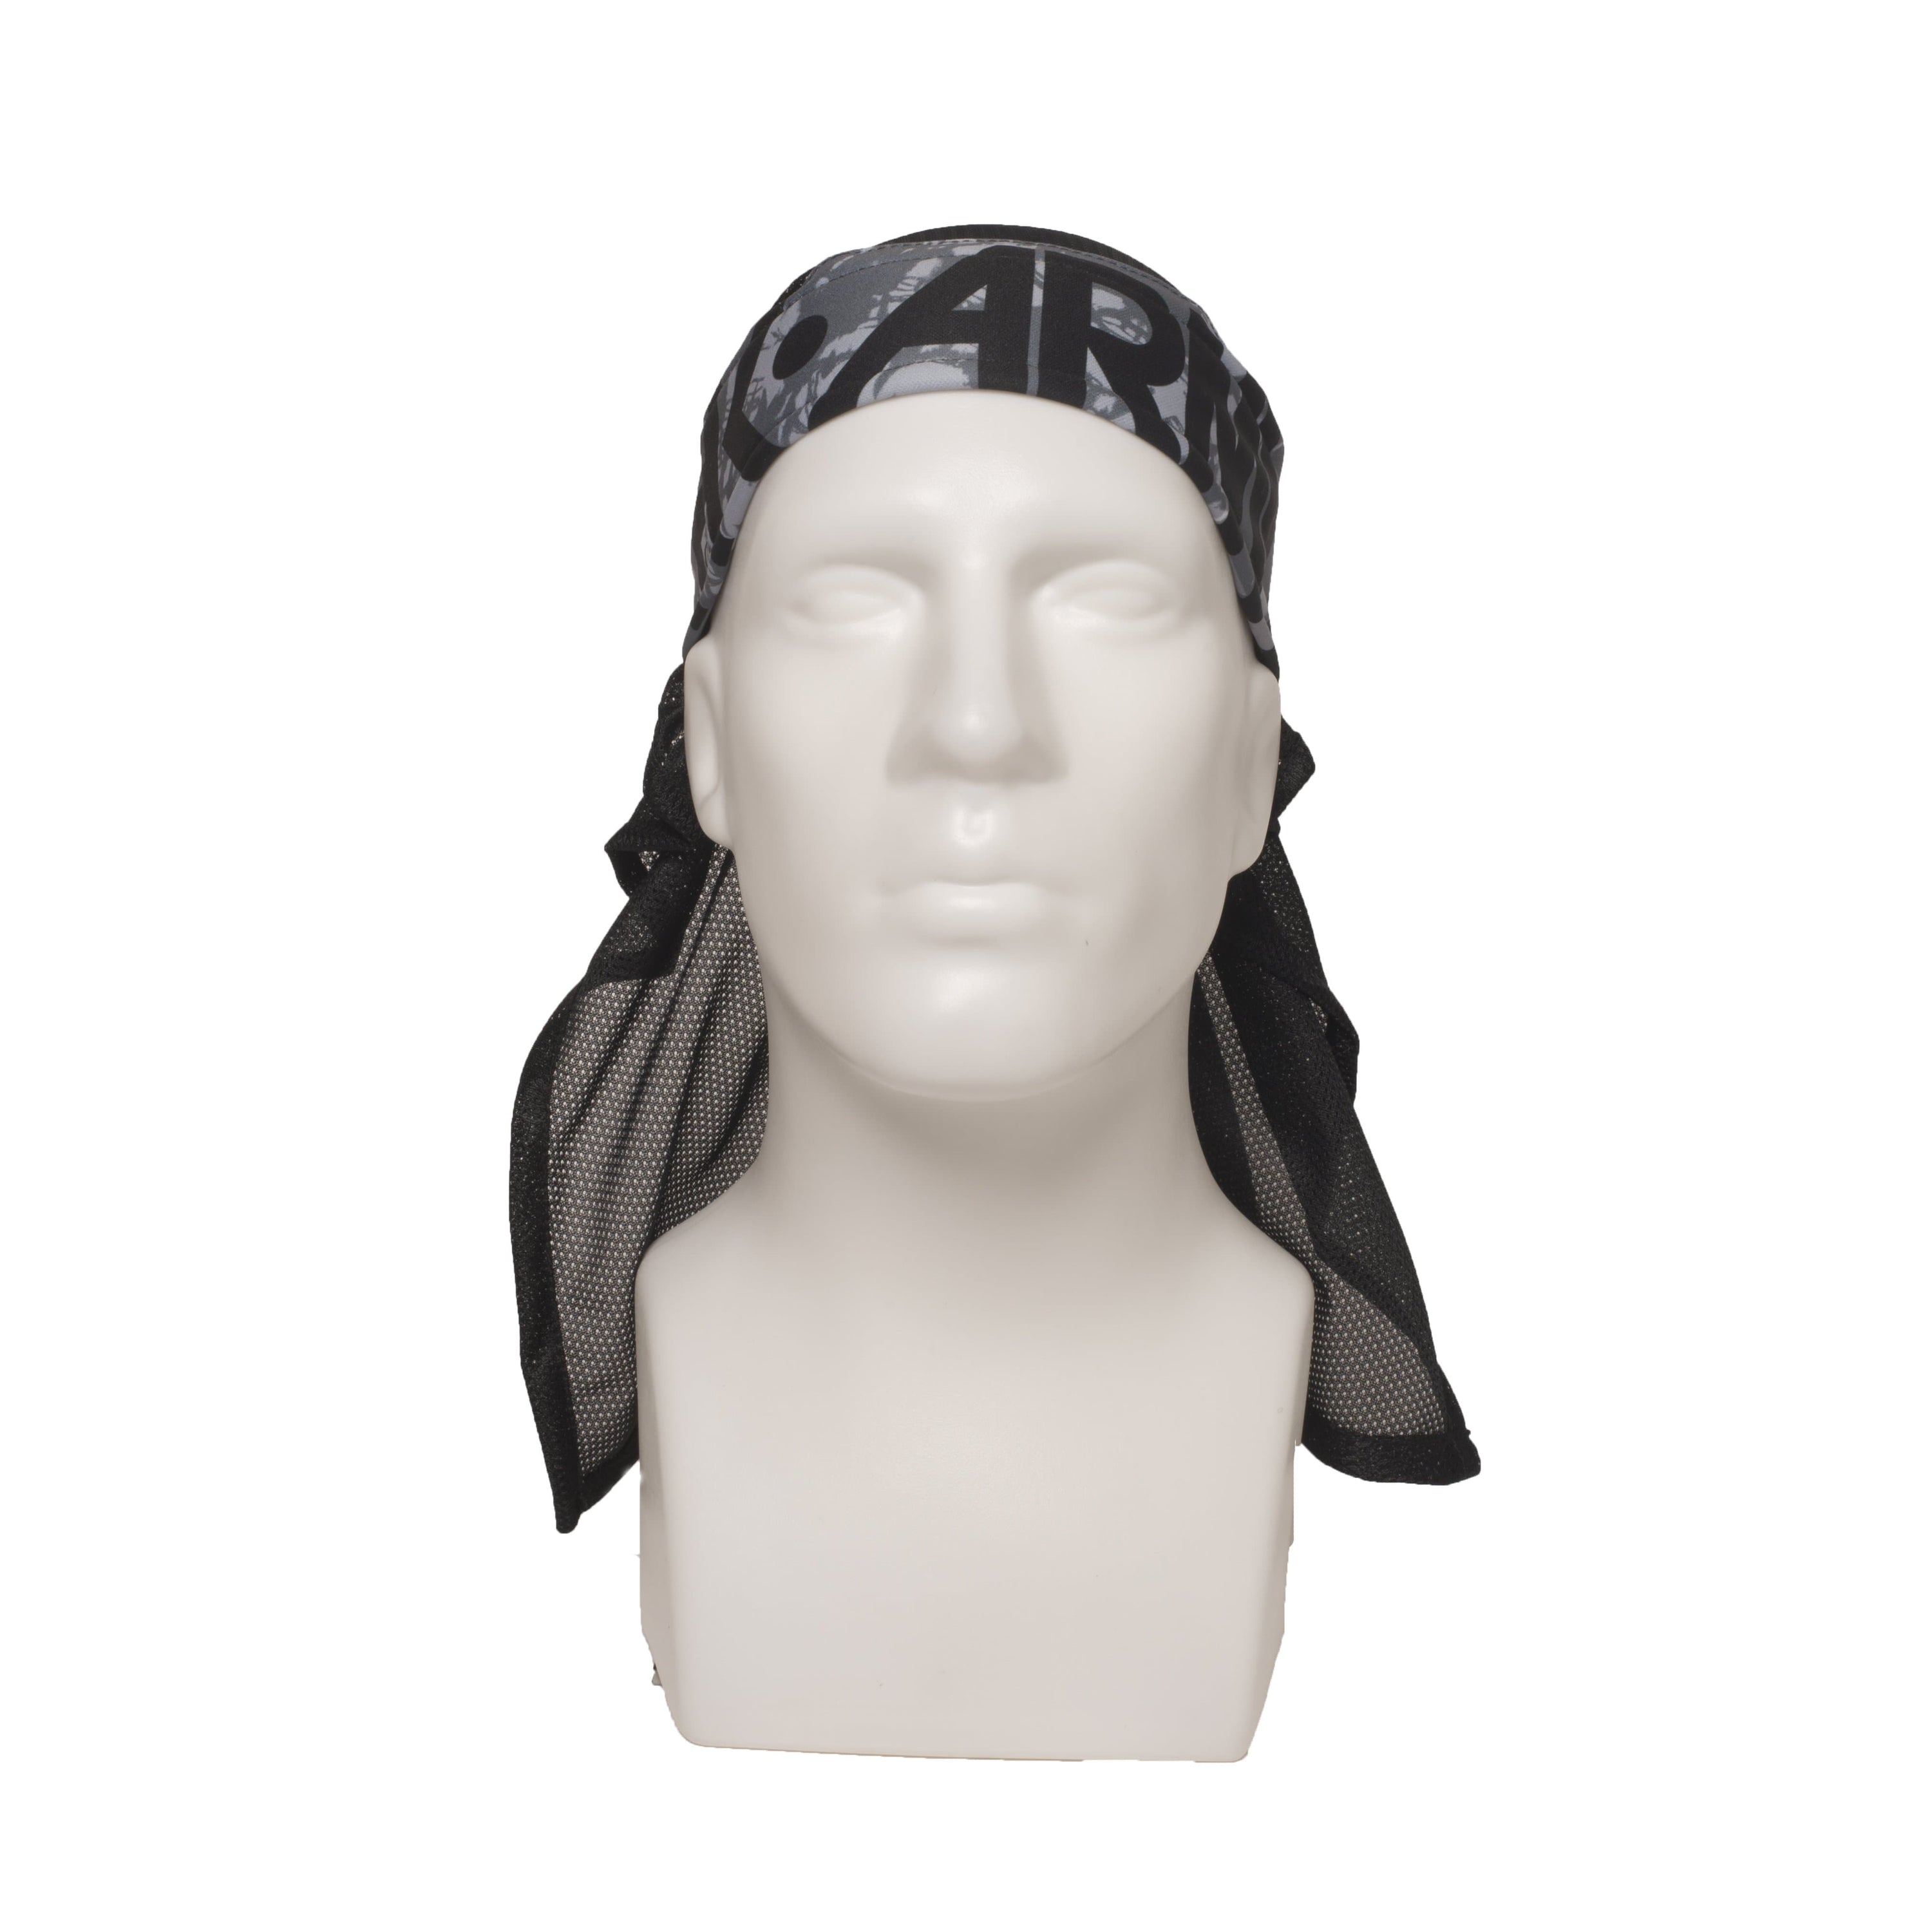 Shale Teal Headwrap - Eminent Paintball And Airsoft